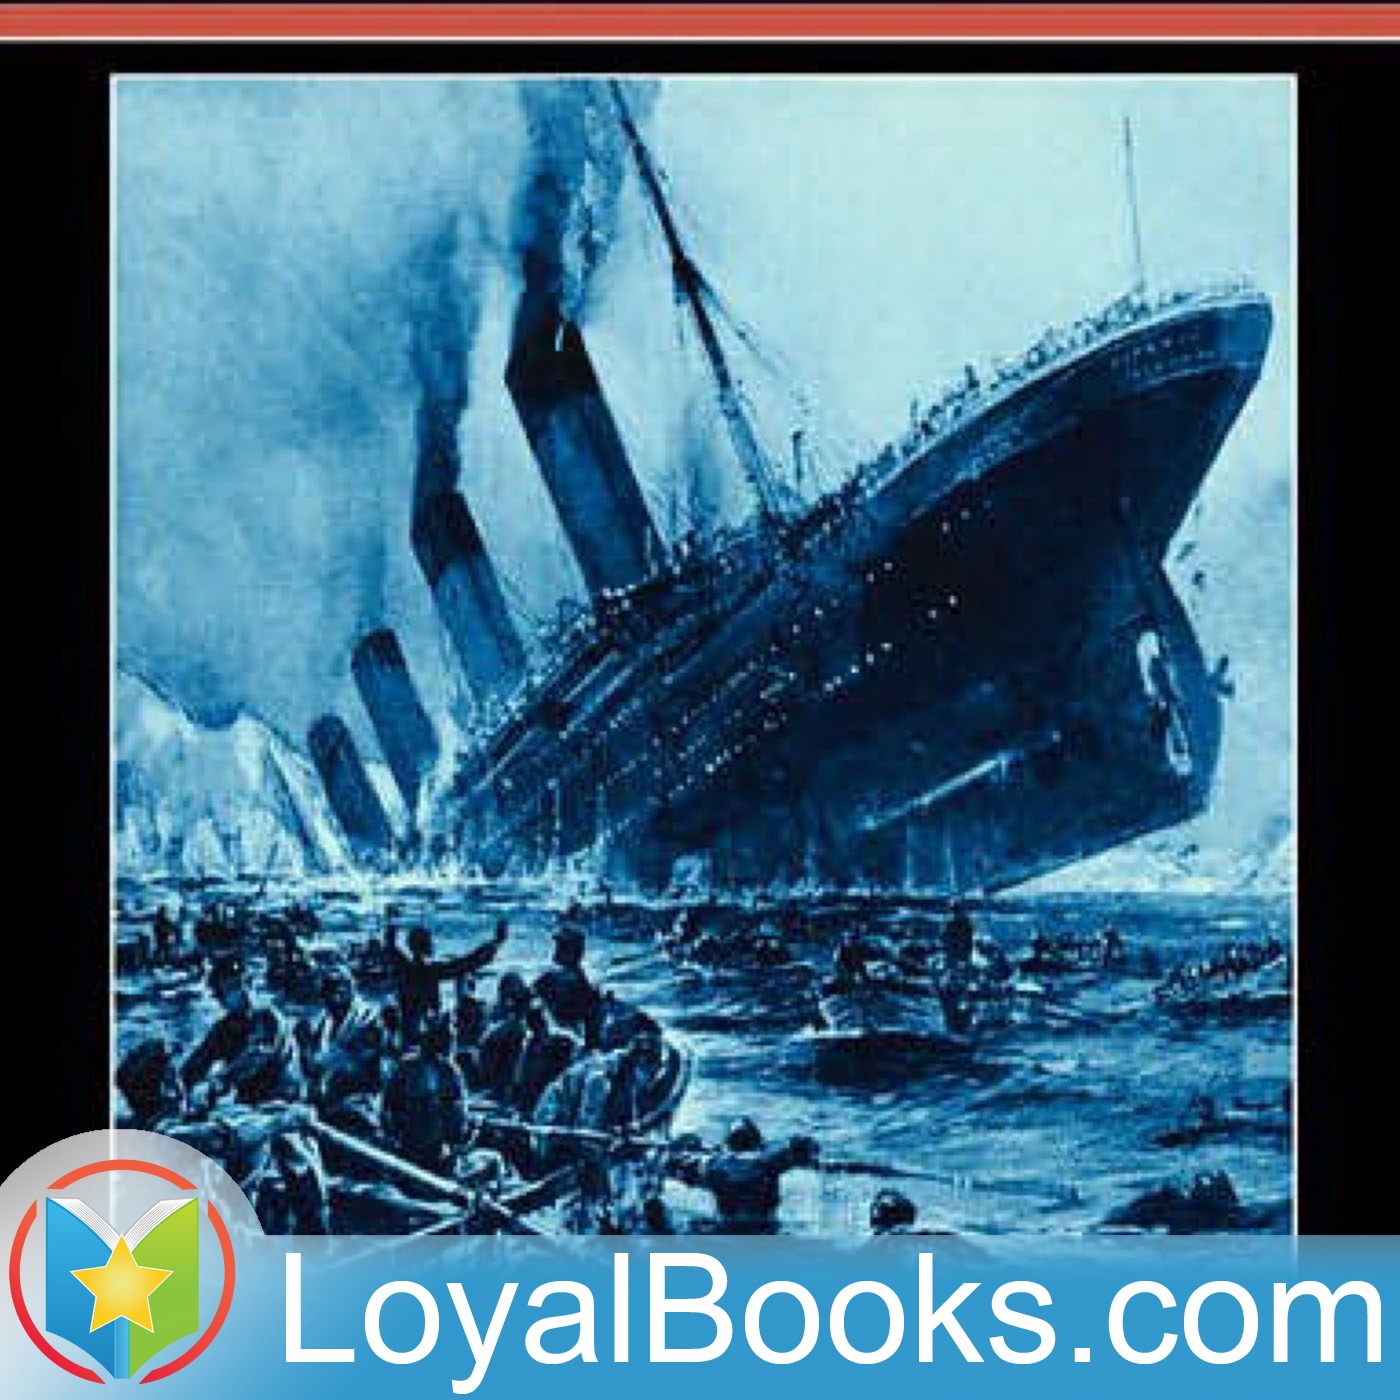 The Loss of the S. S. Titanic by Lawrence Beesley